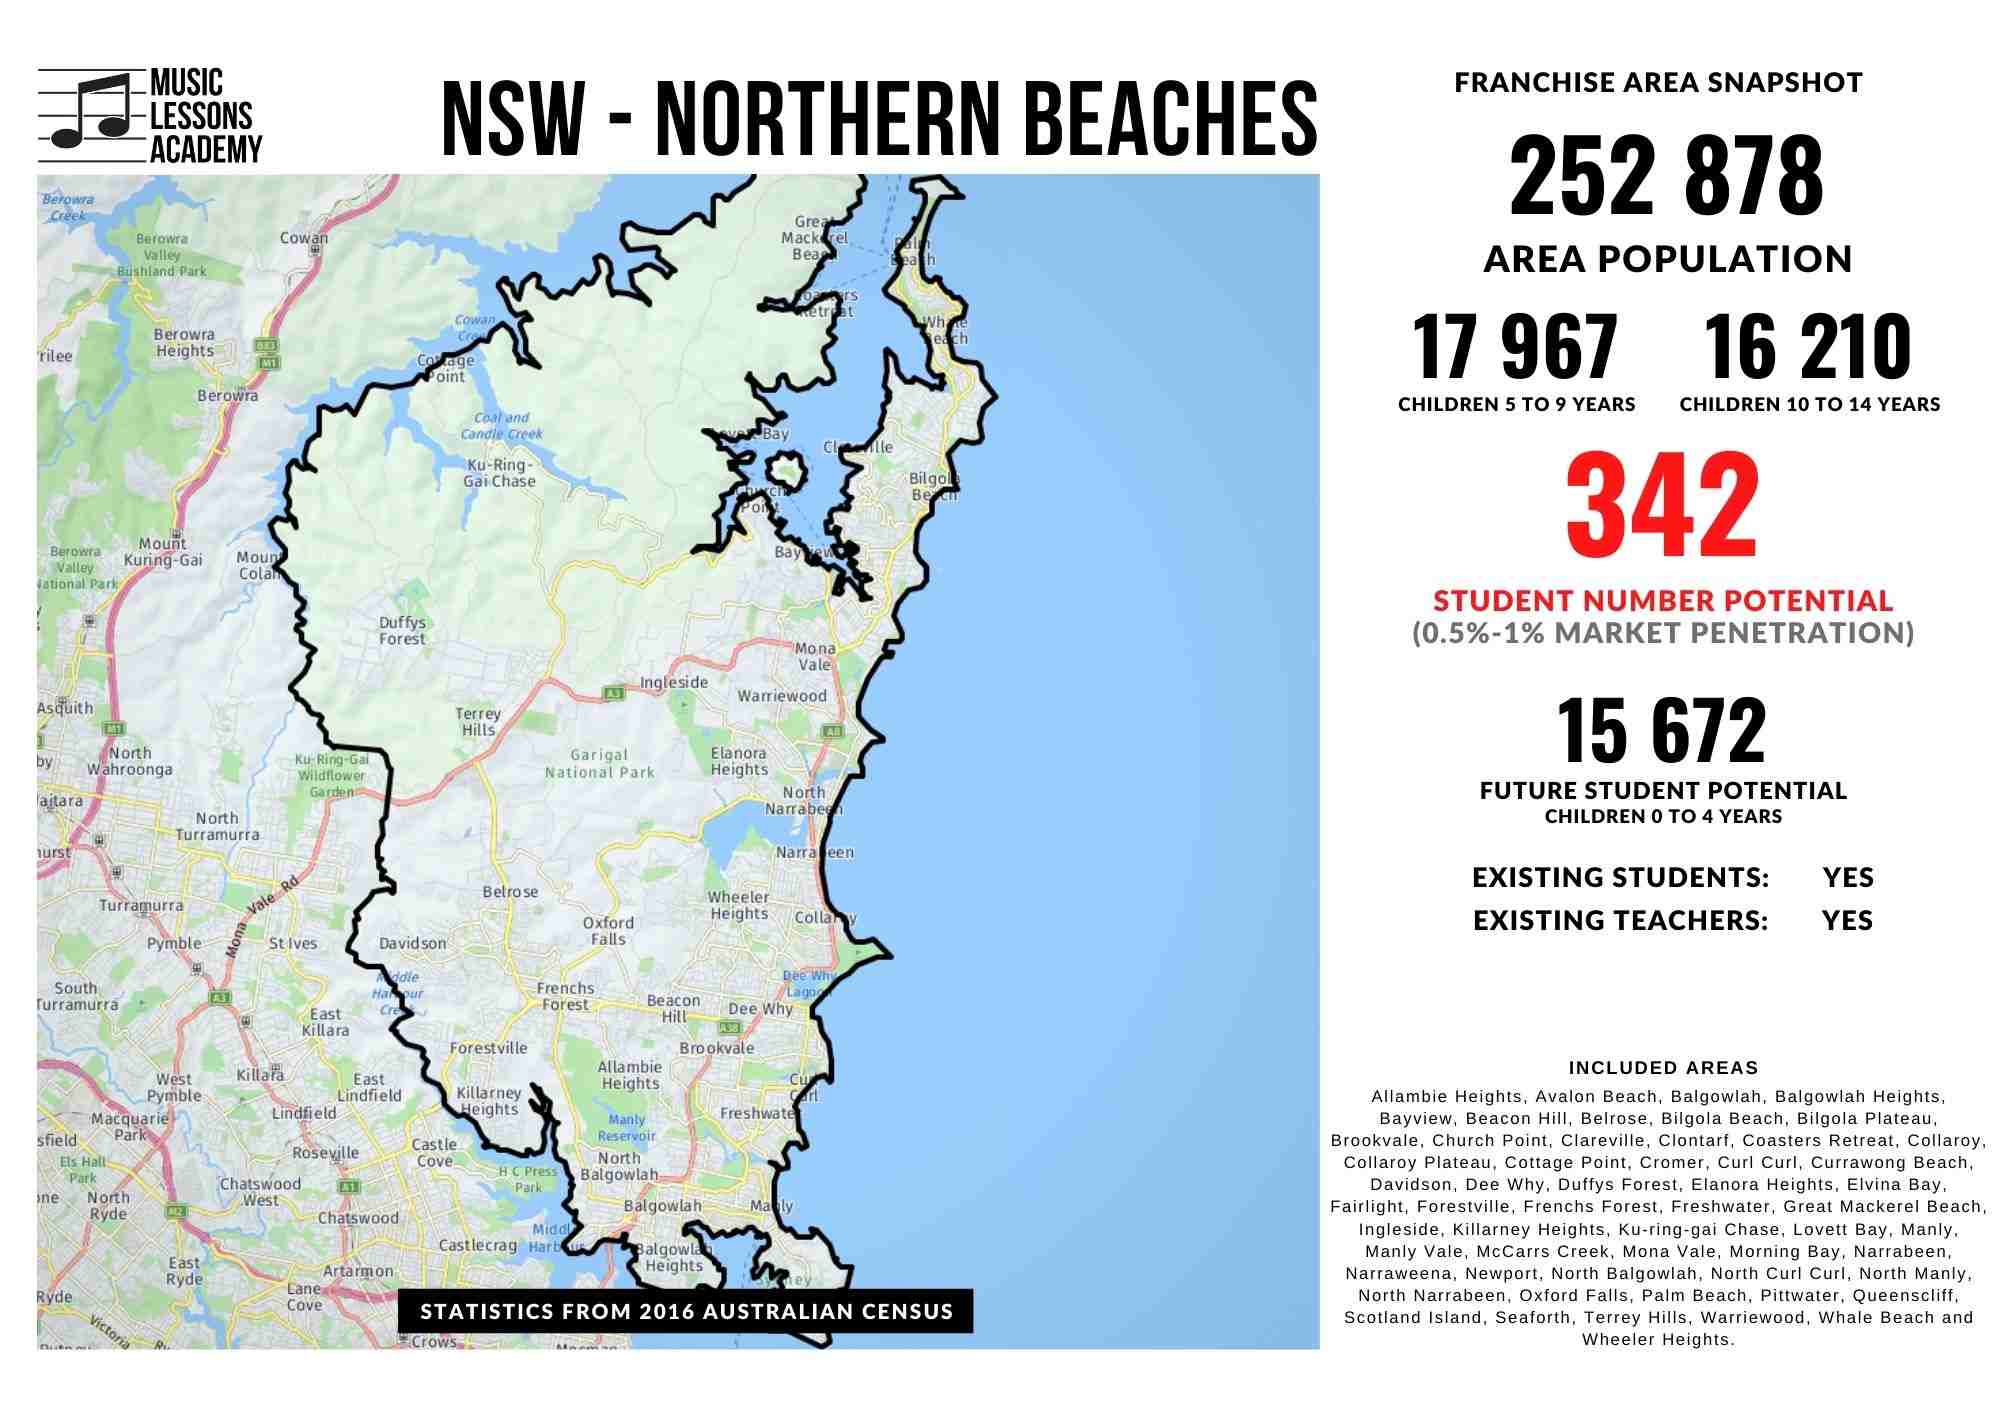 NSW Northern Beaches Franchise for sale